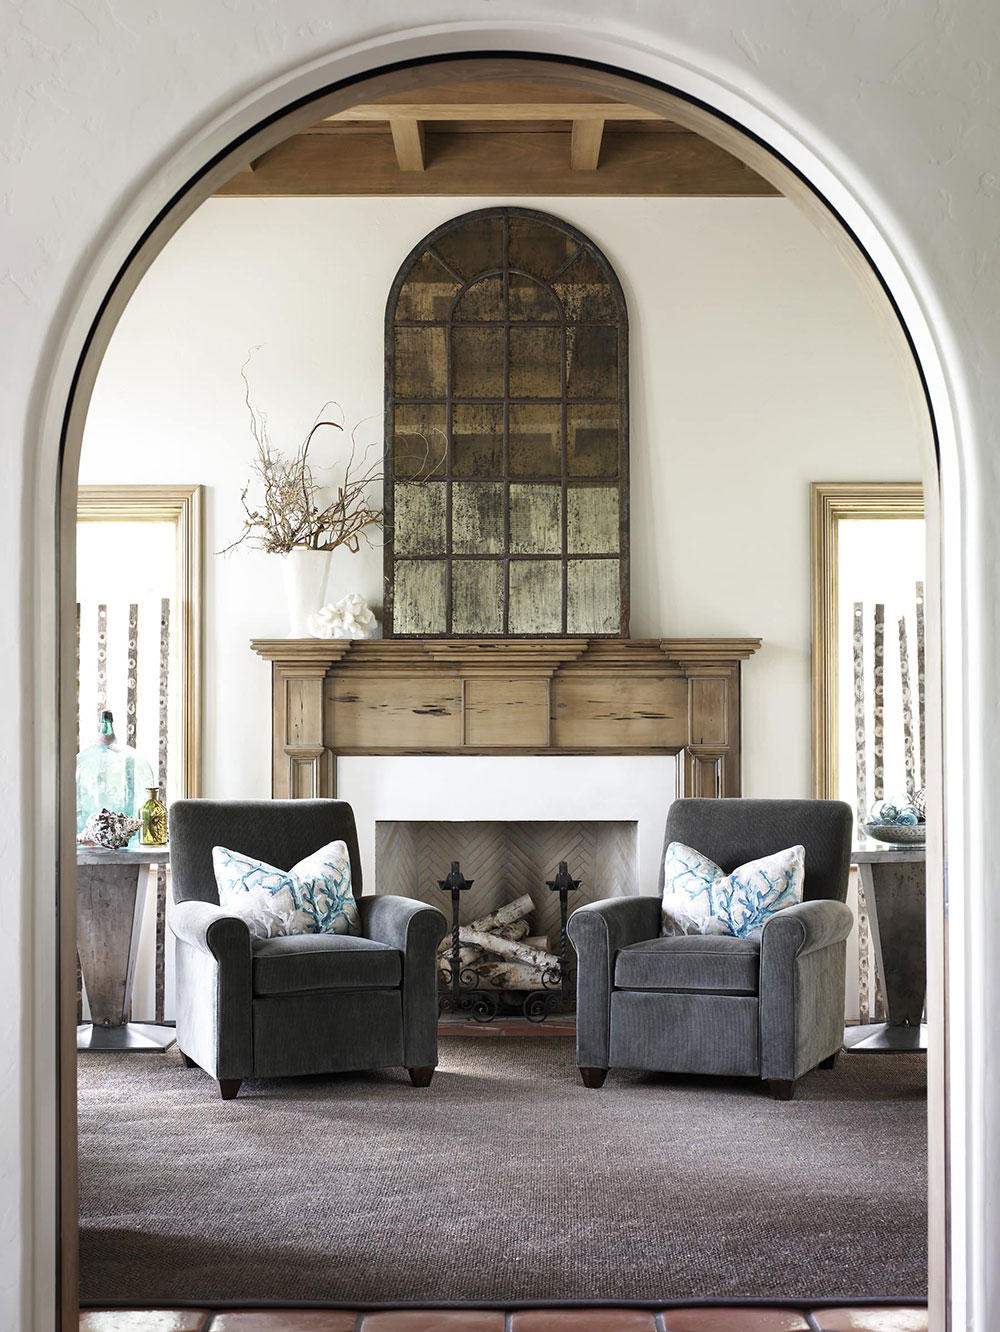 Entrance-Seating-by-Carter-Kay-Interiors How to decorate a fireplace mantel (neat decoration ideas)